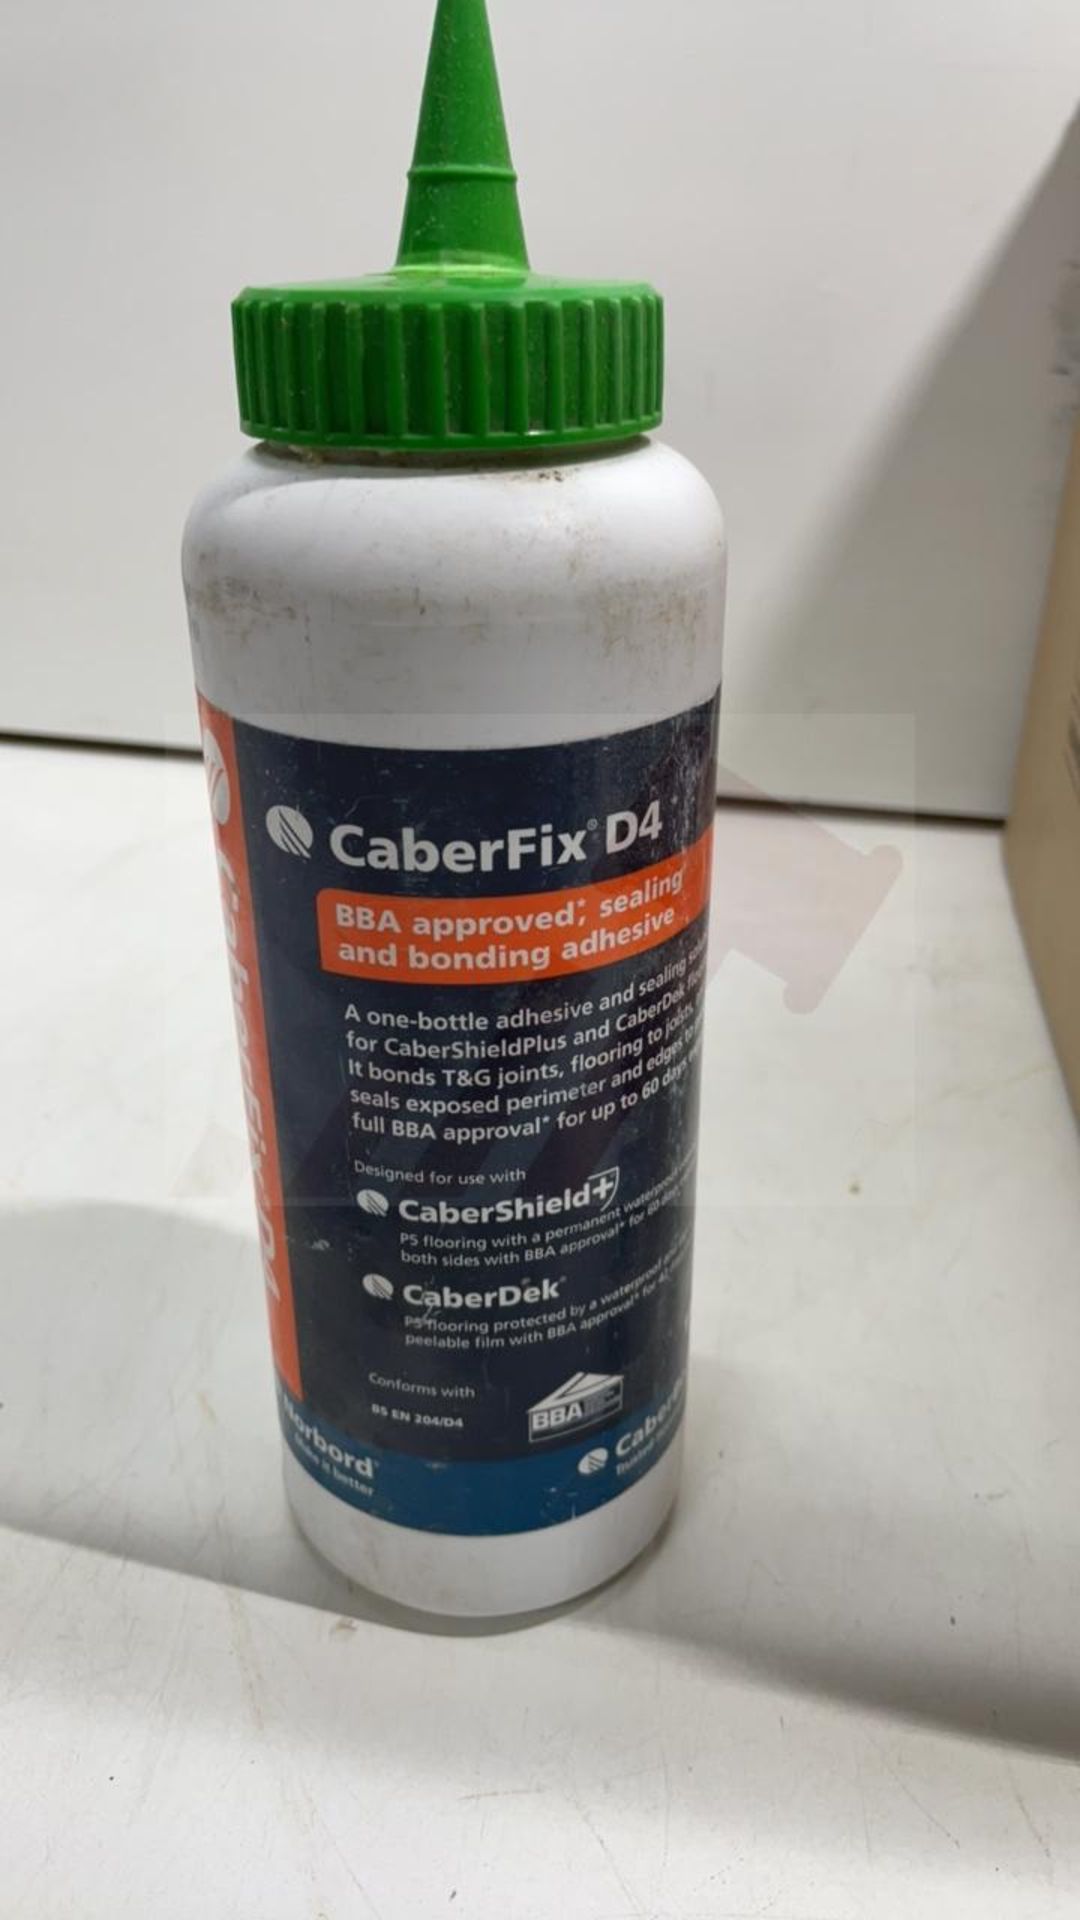 54X Caberfix D4 solvent free adhesive Bottles - Image 2 of 3